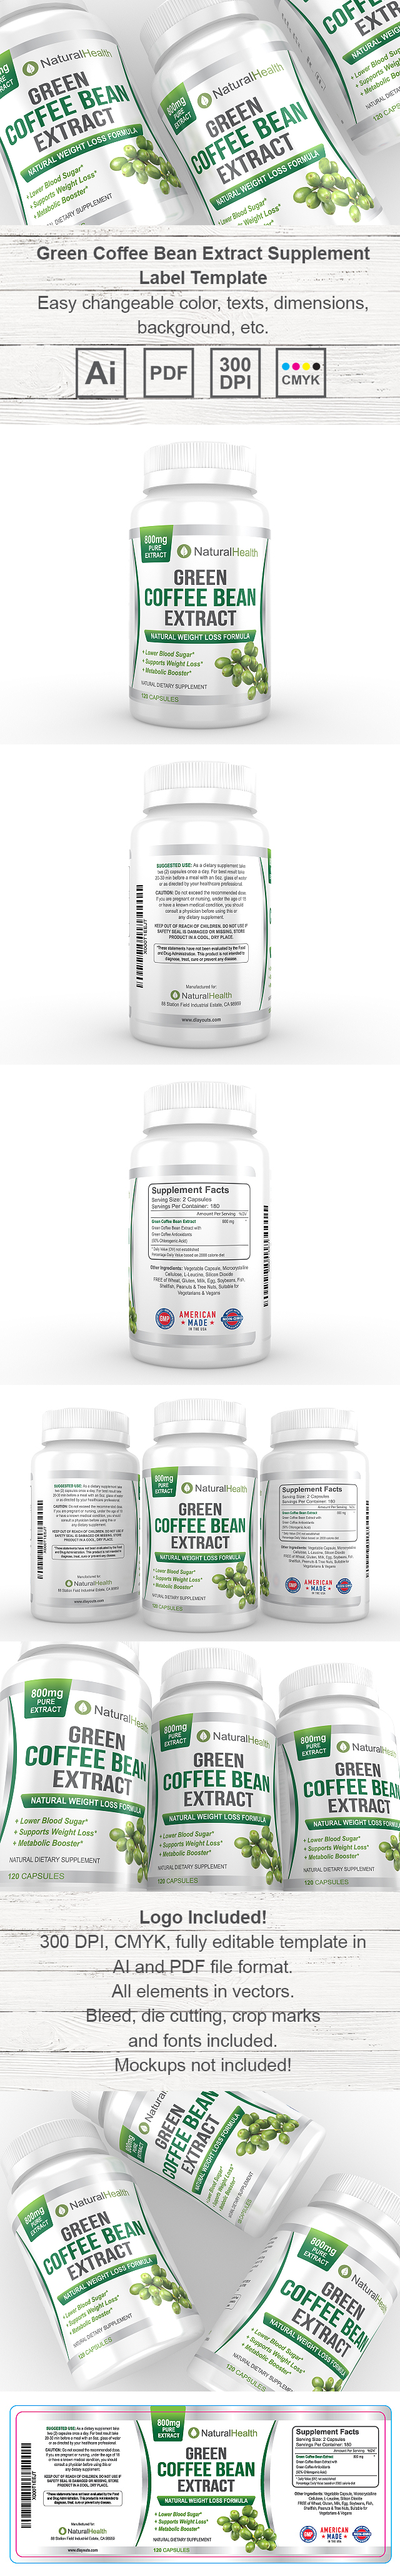 Green Coffee Bean Extract Supplement Label Template